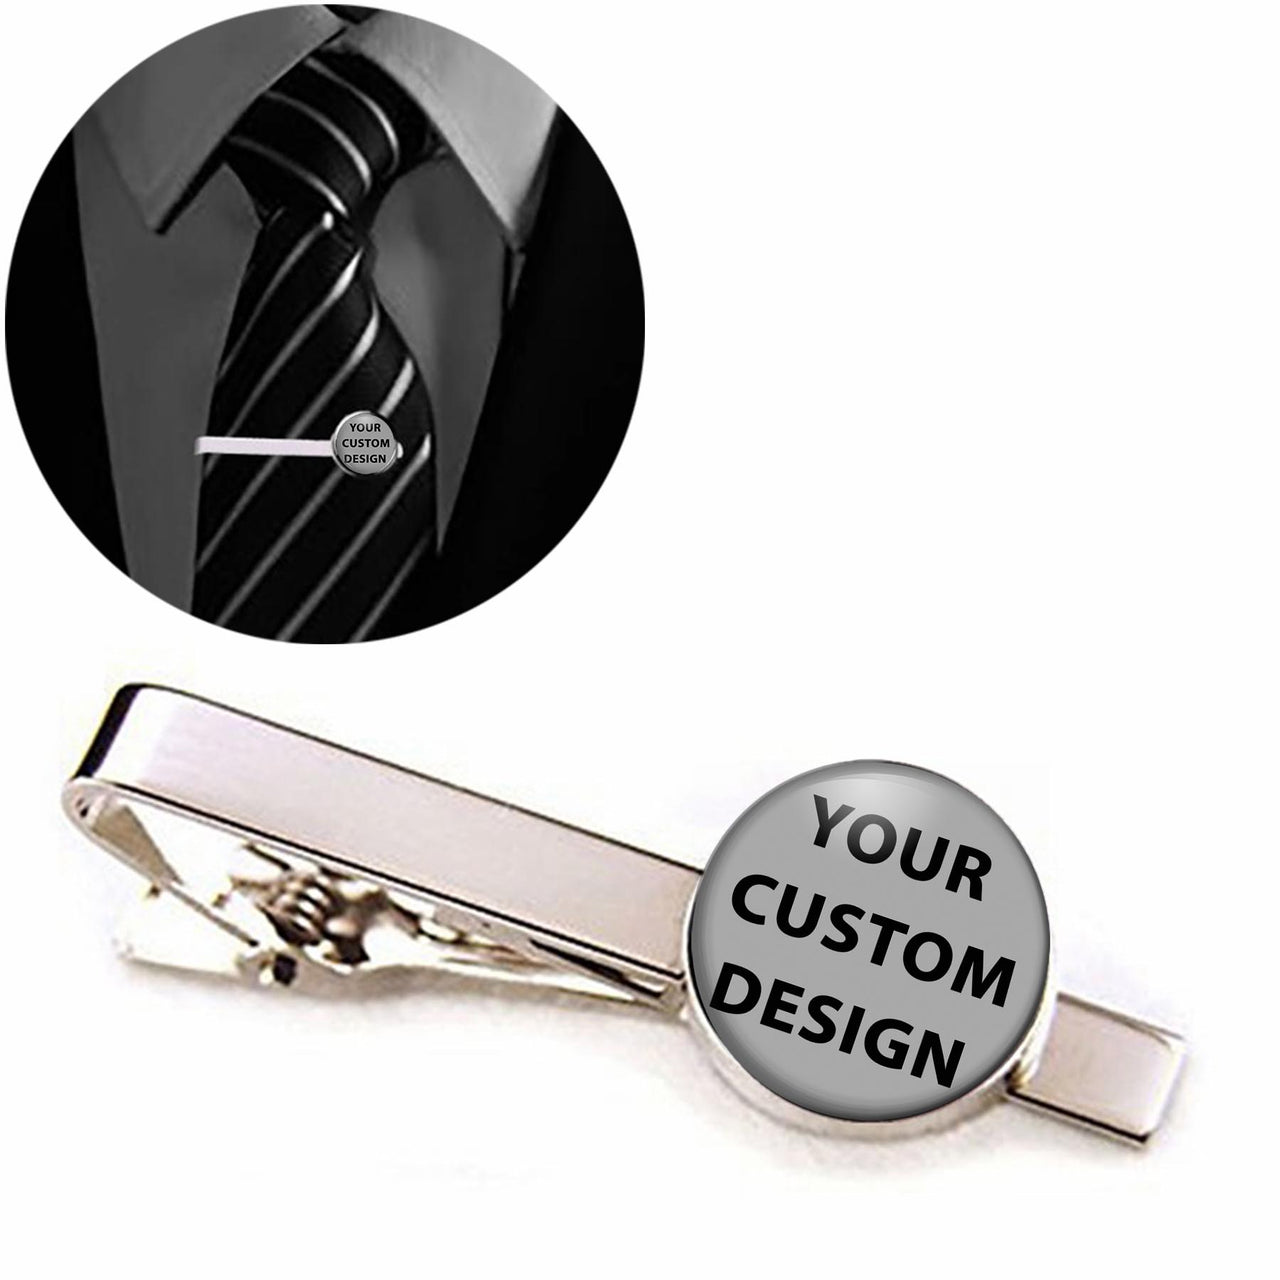 Your Custom Desing/Image/Photo Designed Tie Clips